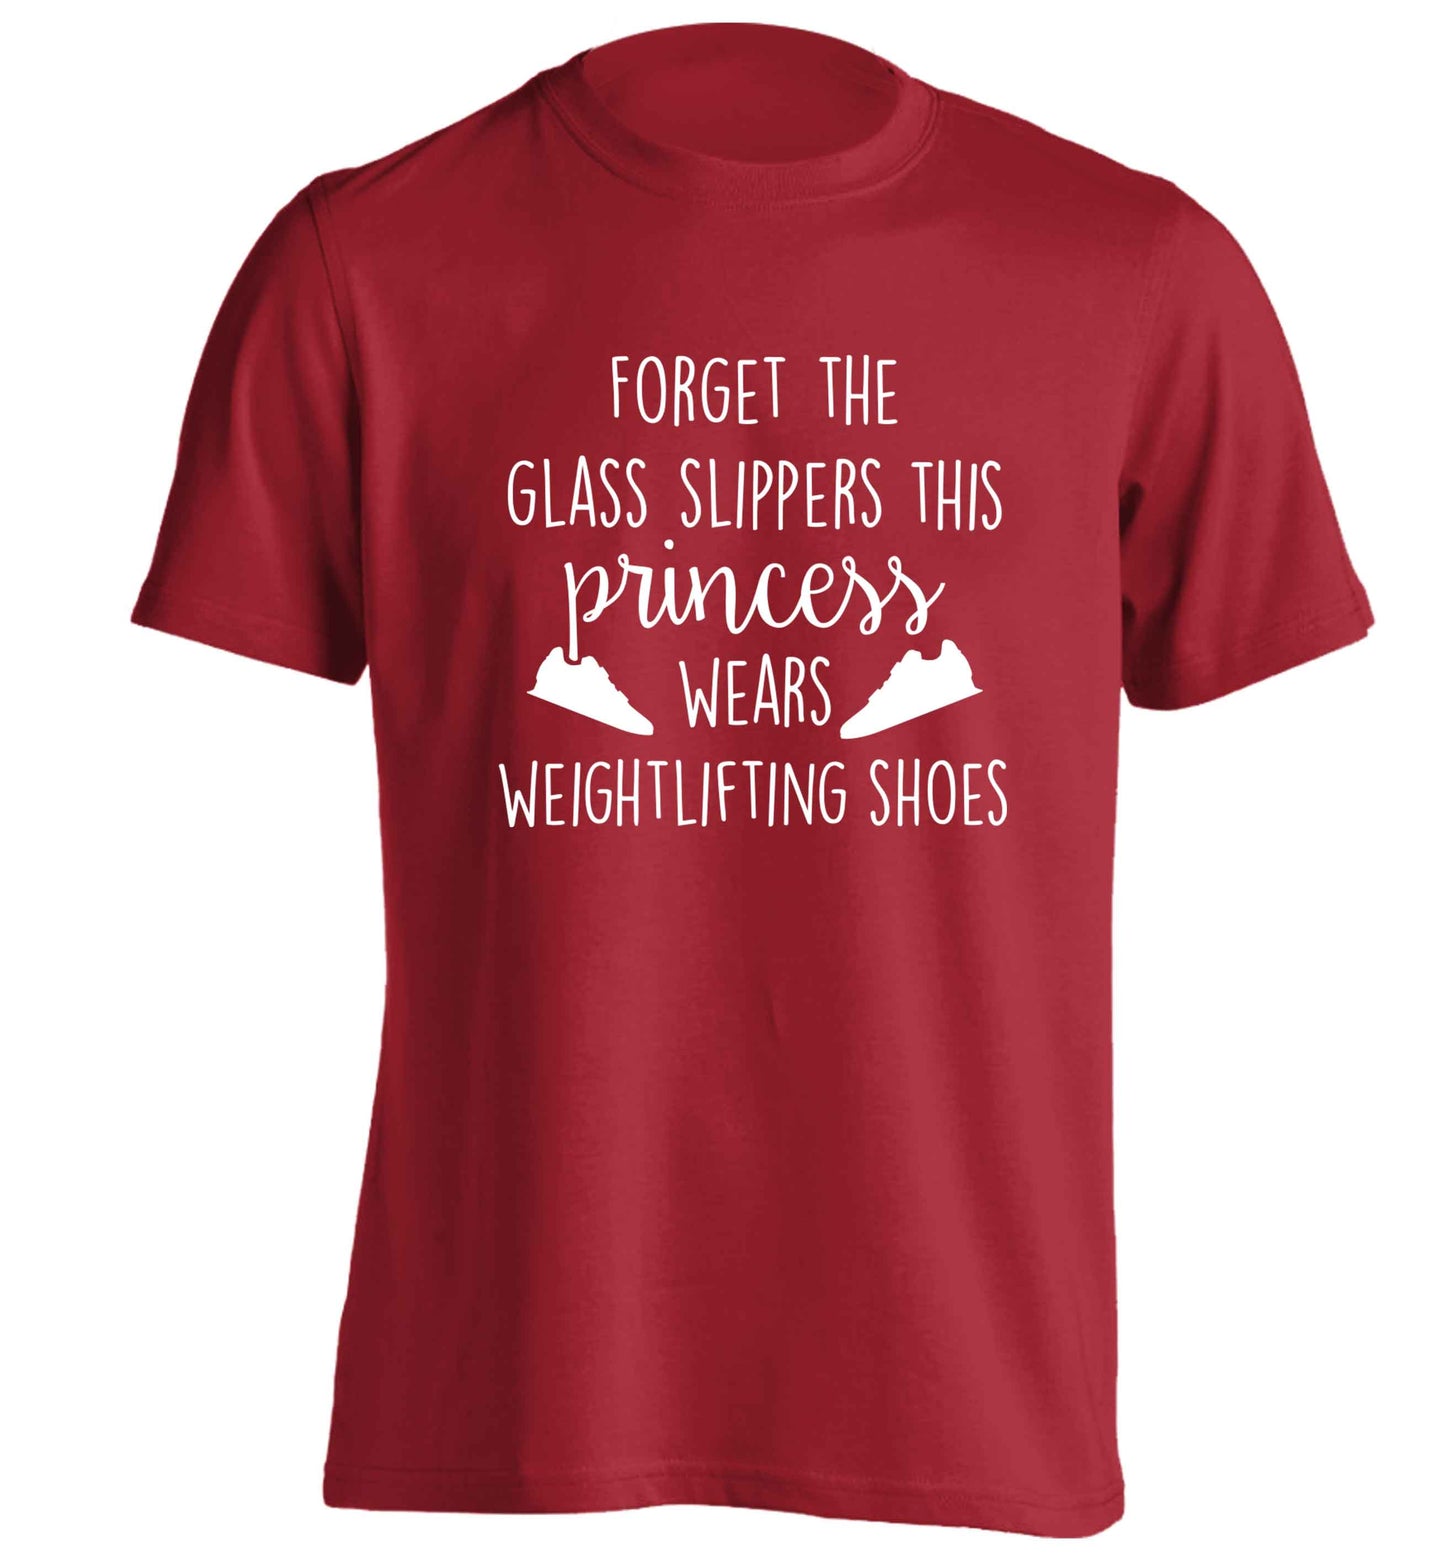 Forget the glass slippers this princess wears weightlifting shoes adults unisex red Tshirt 2XL